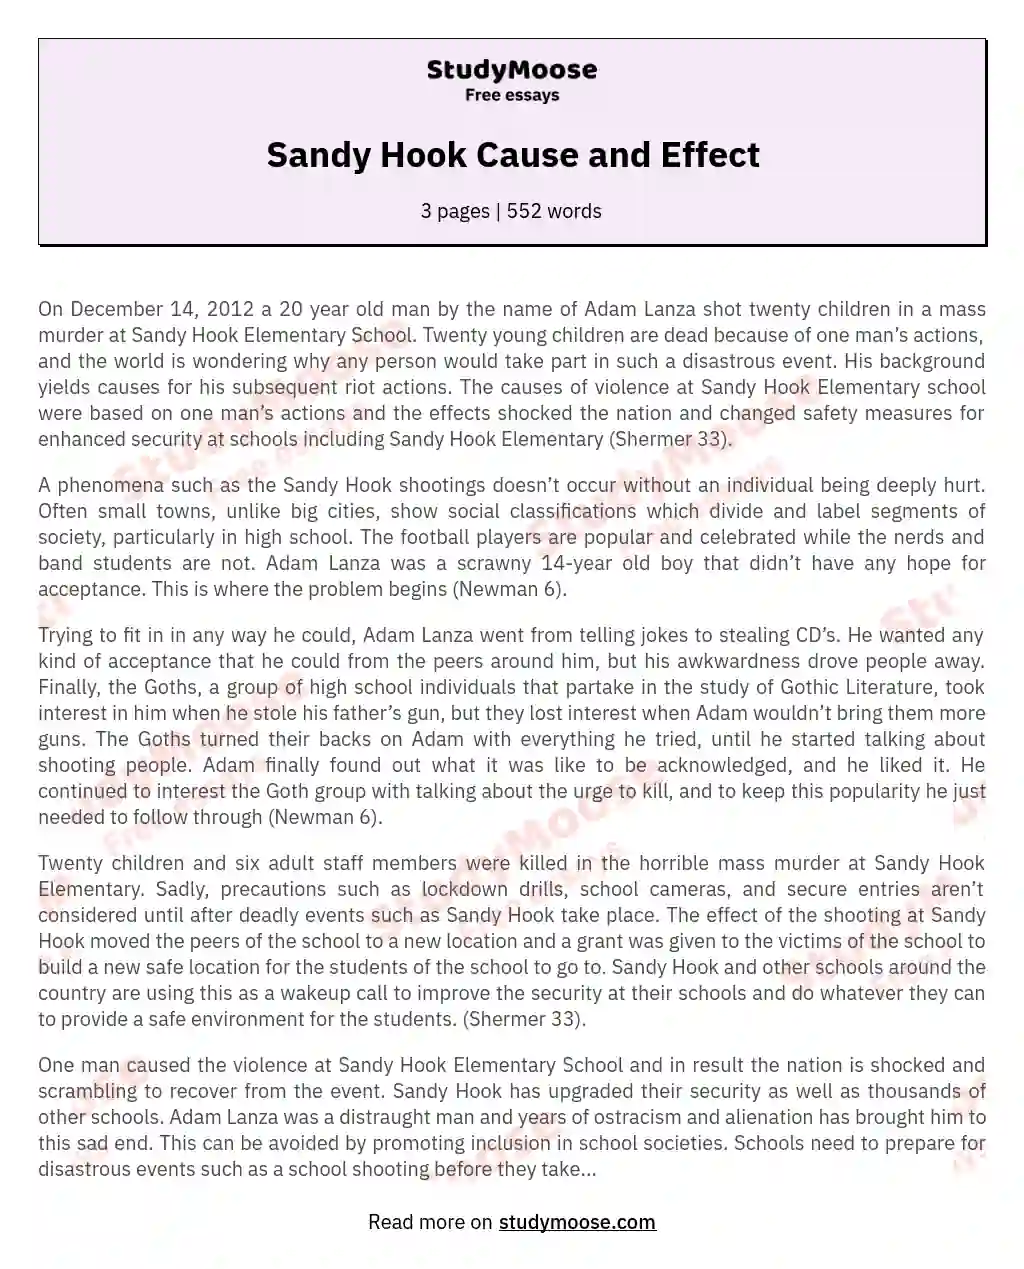 Sandy Hook Cause and Effect